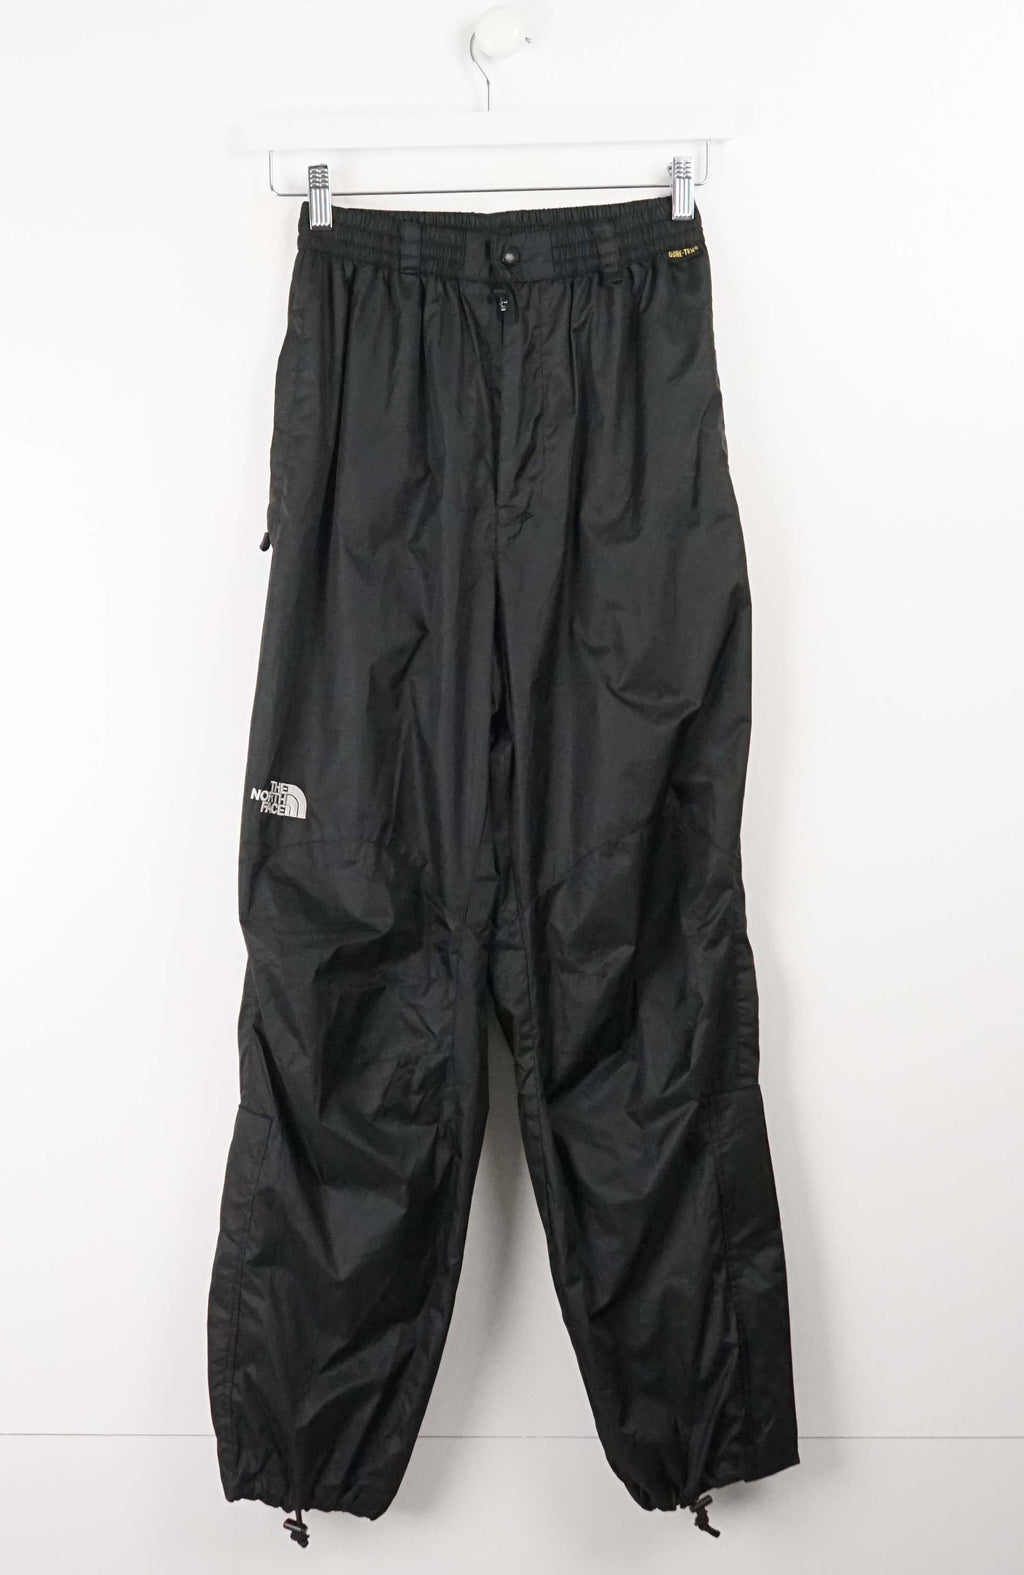 VINTAGE THE NORTH FACE TRACK PANTS W24